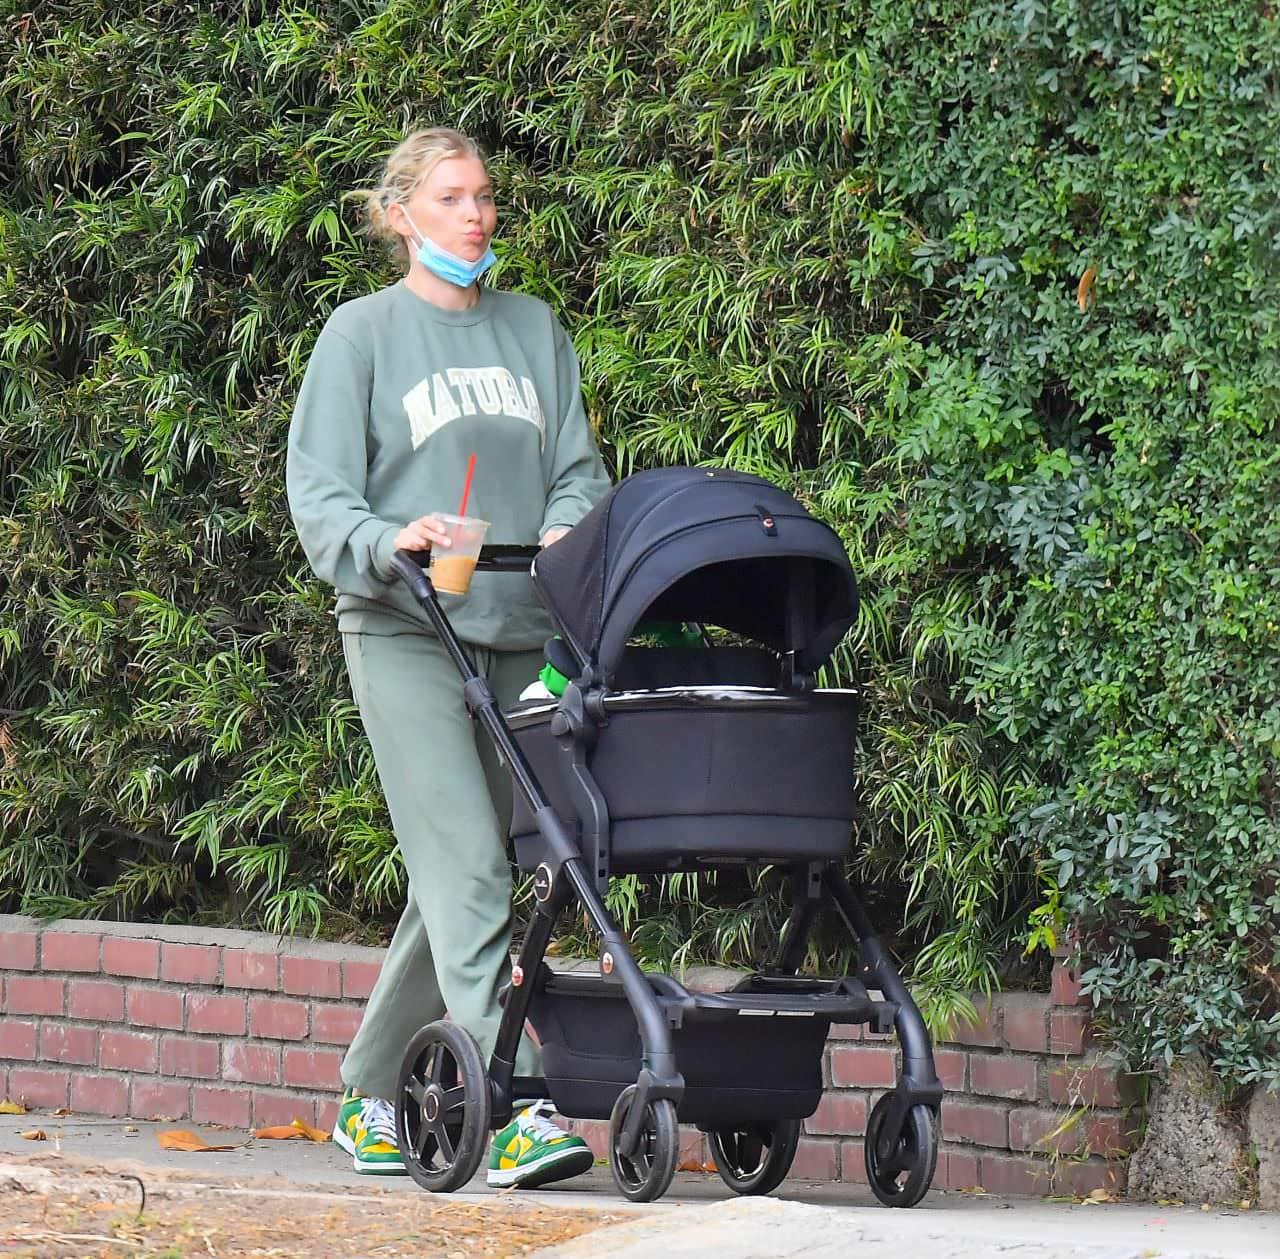 elsa hosk heads out on a stroll with her newborn daughter 3